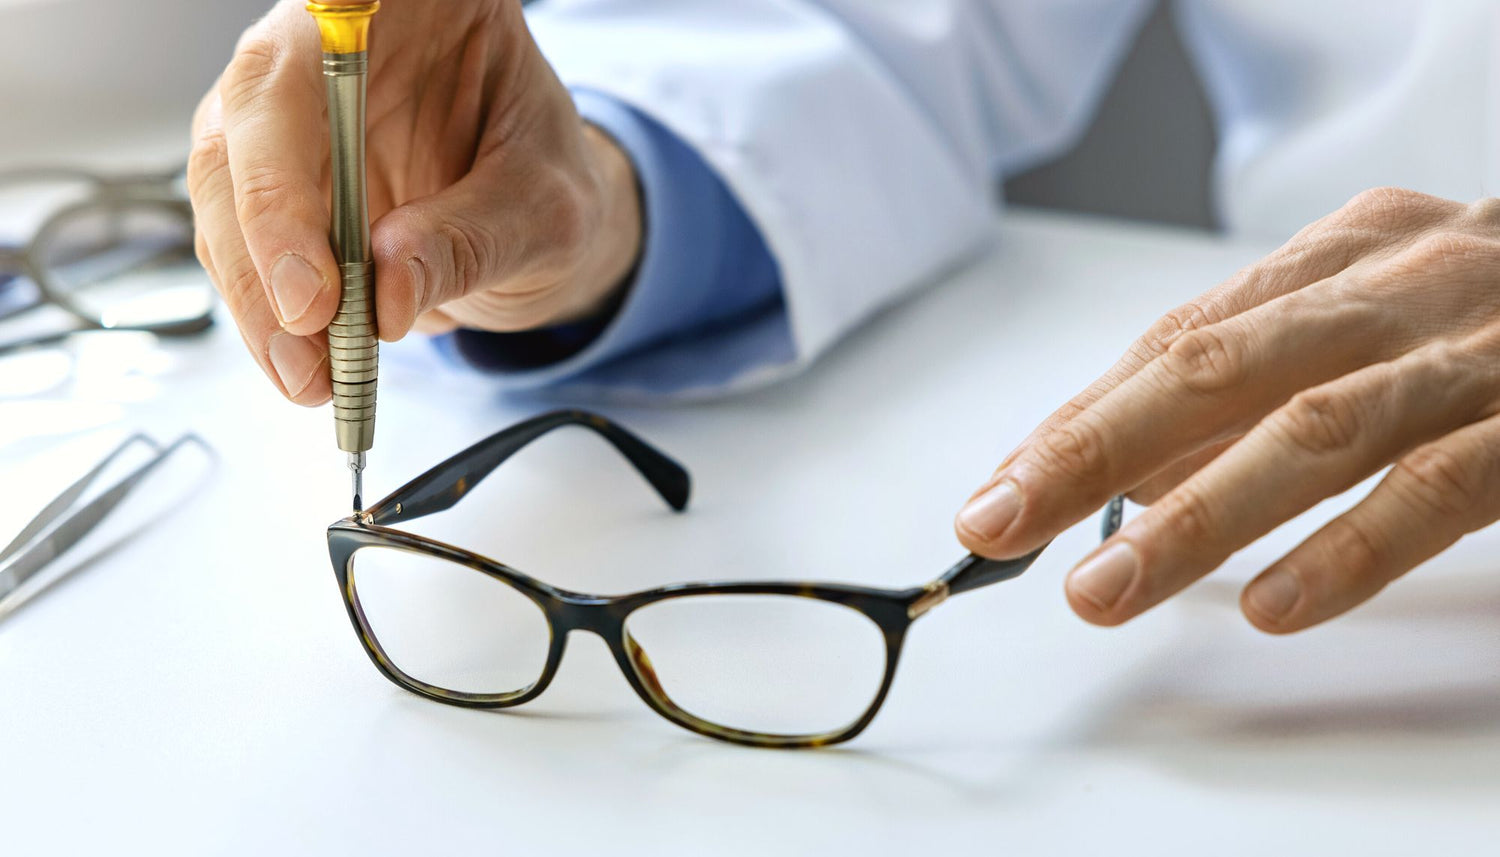 Hands repairing black glasses with a screwdriver. 